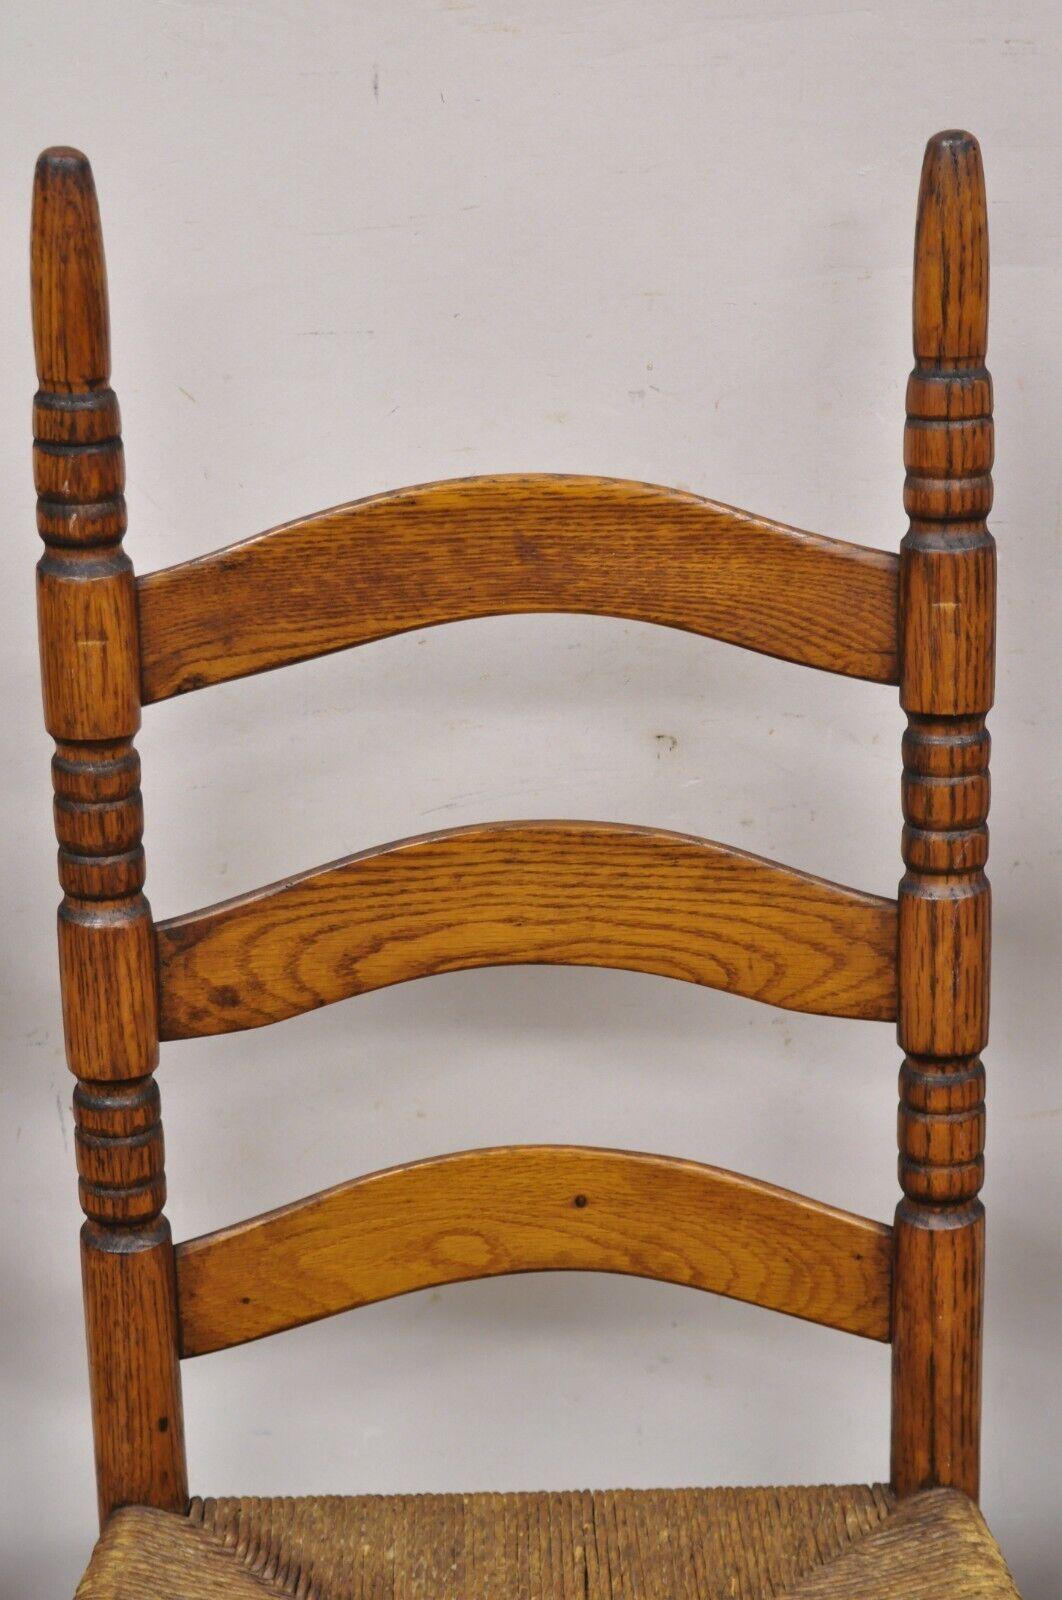 Antique Ladderback Primitive Rustic Oak Wood Rush Seat Dining Chairs - Set of 4 For Sale 5